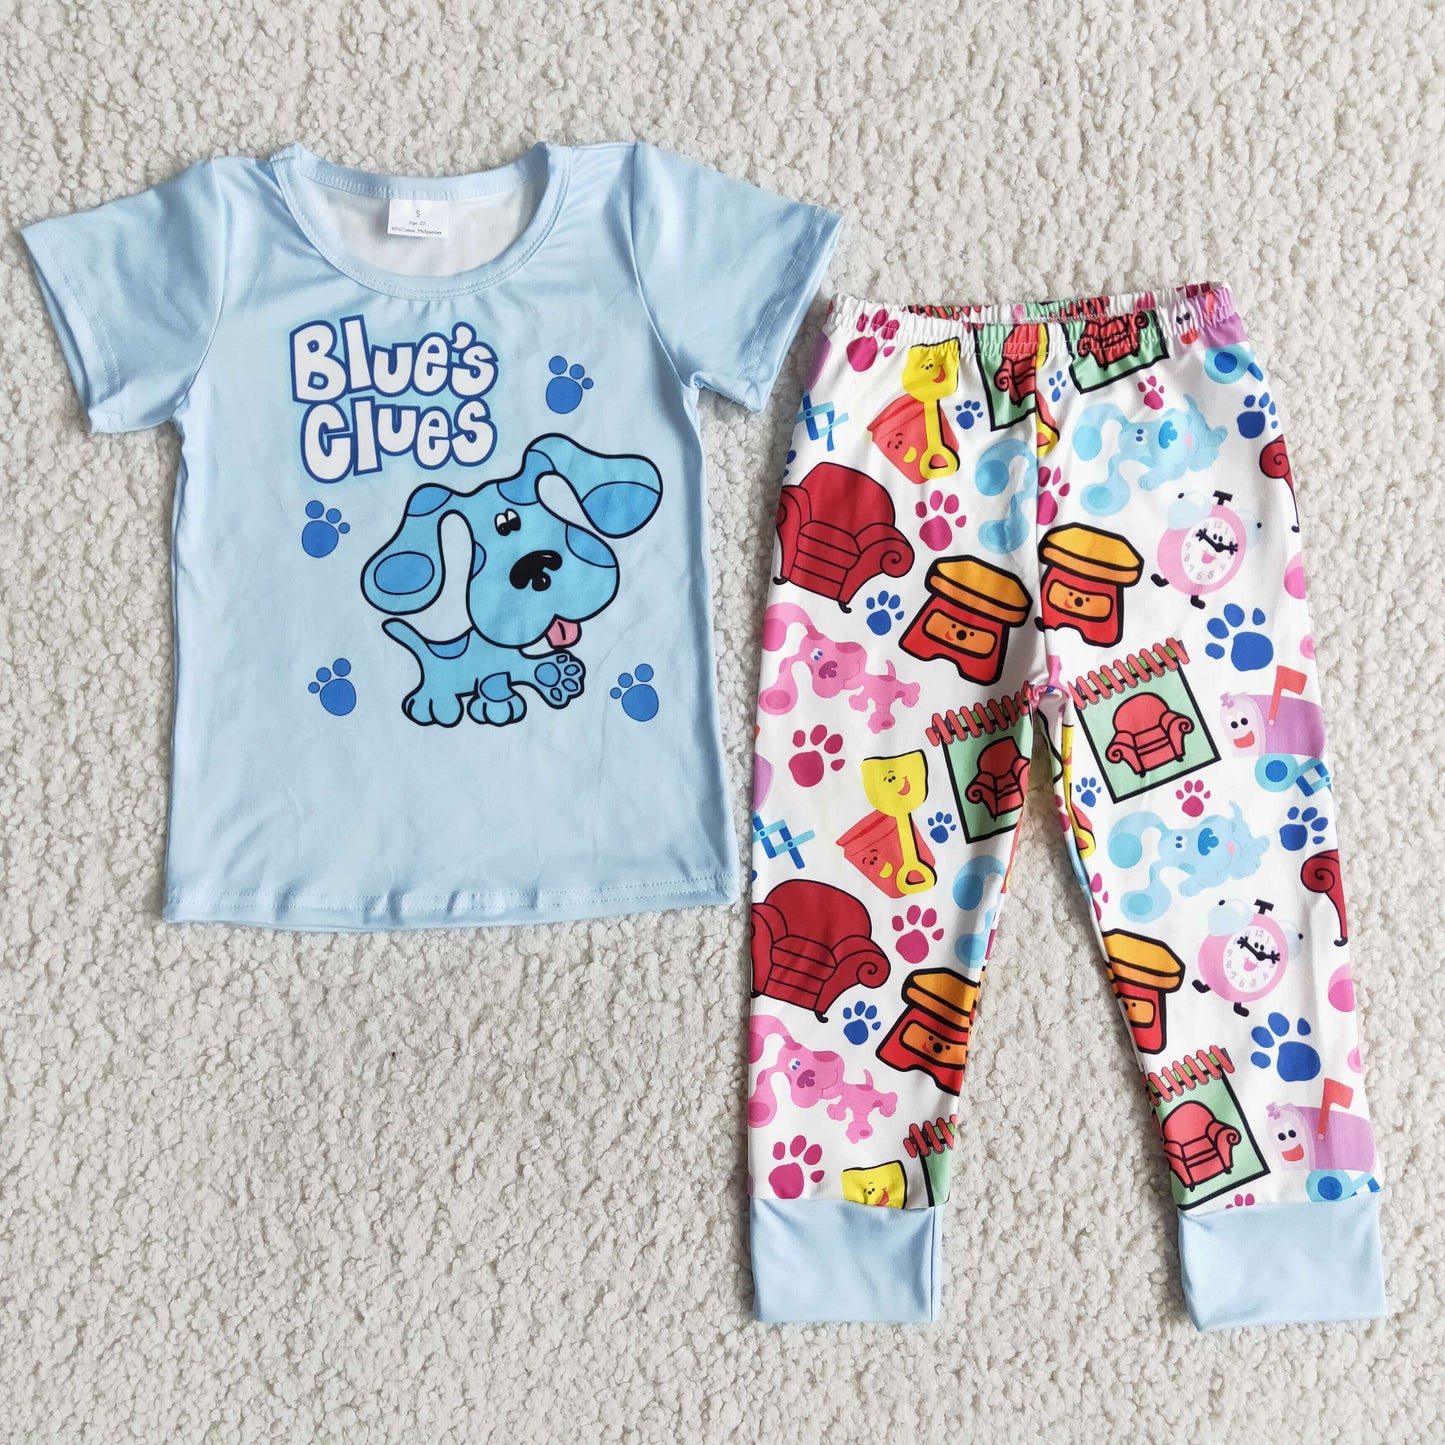 boy's outfit pants set clothing